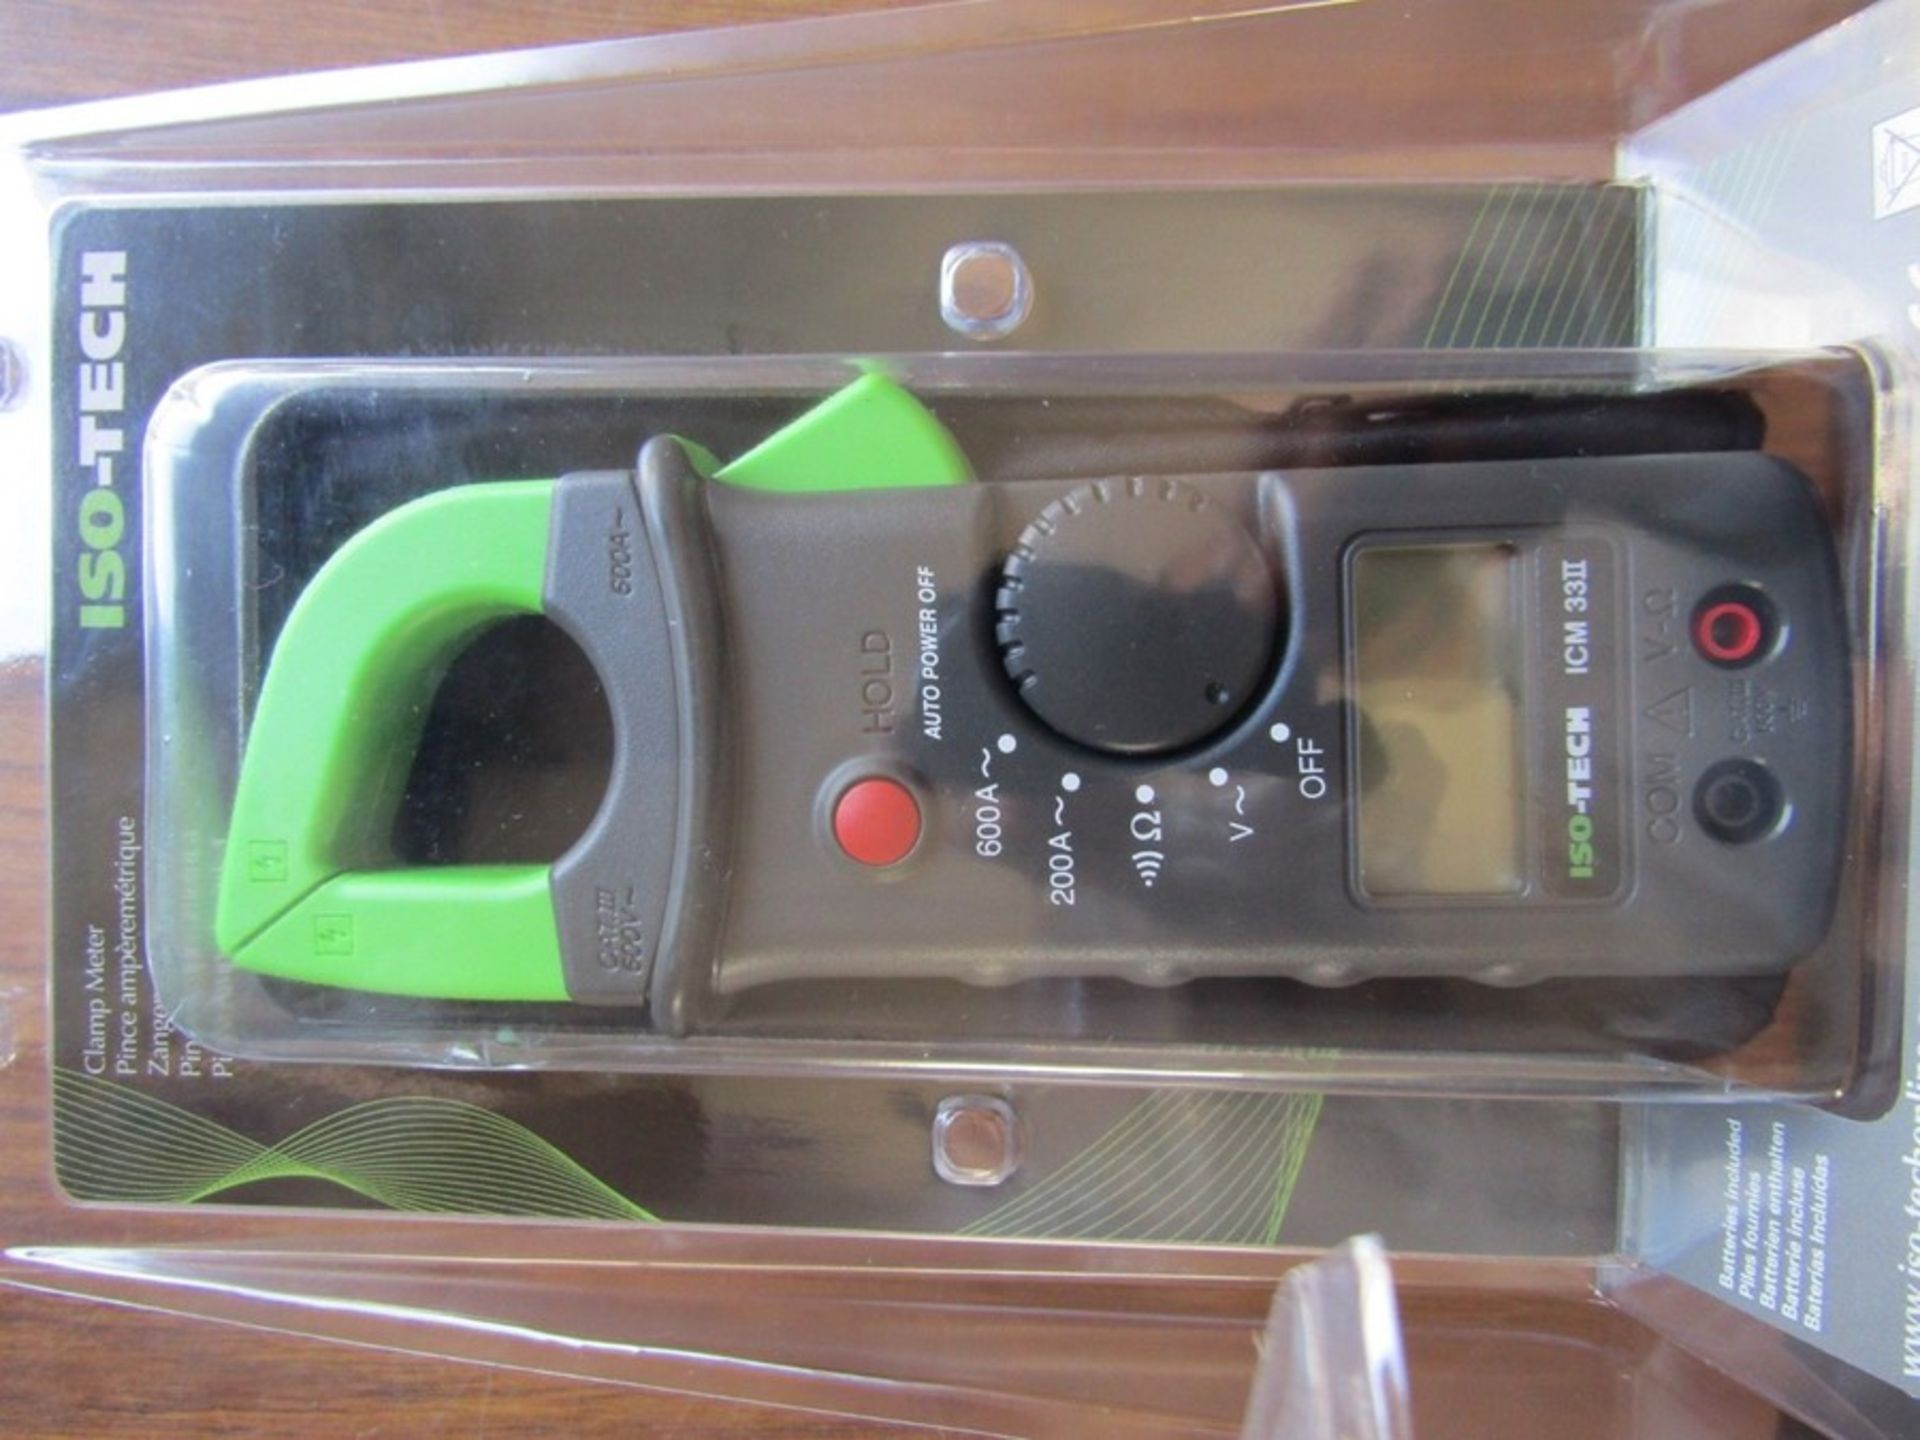 ISO-TECH ICM33II Clamp Meter, Max Current 600A ac CAT III 300V J4 6973976